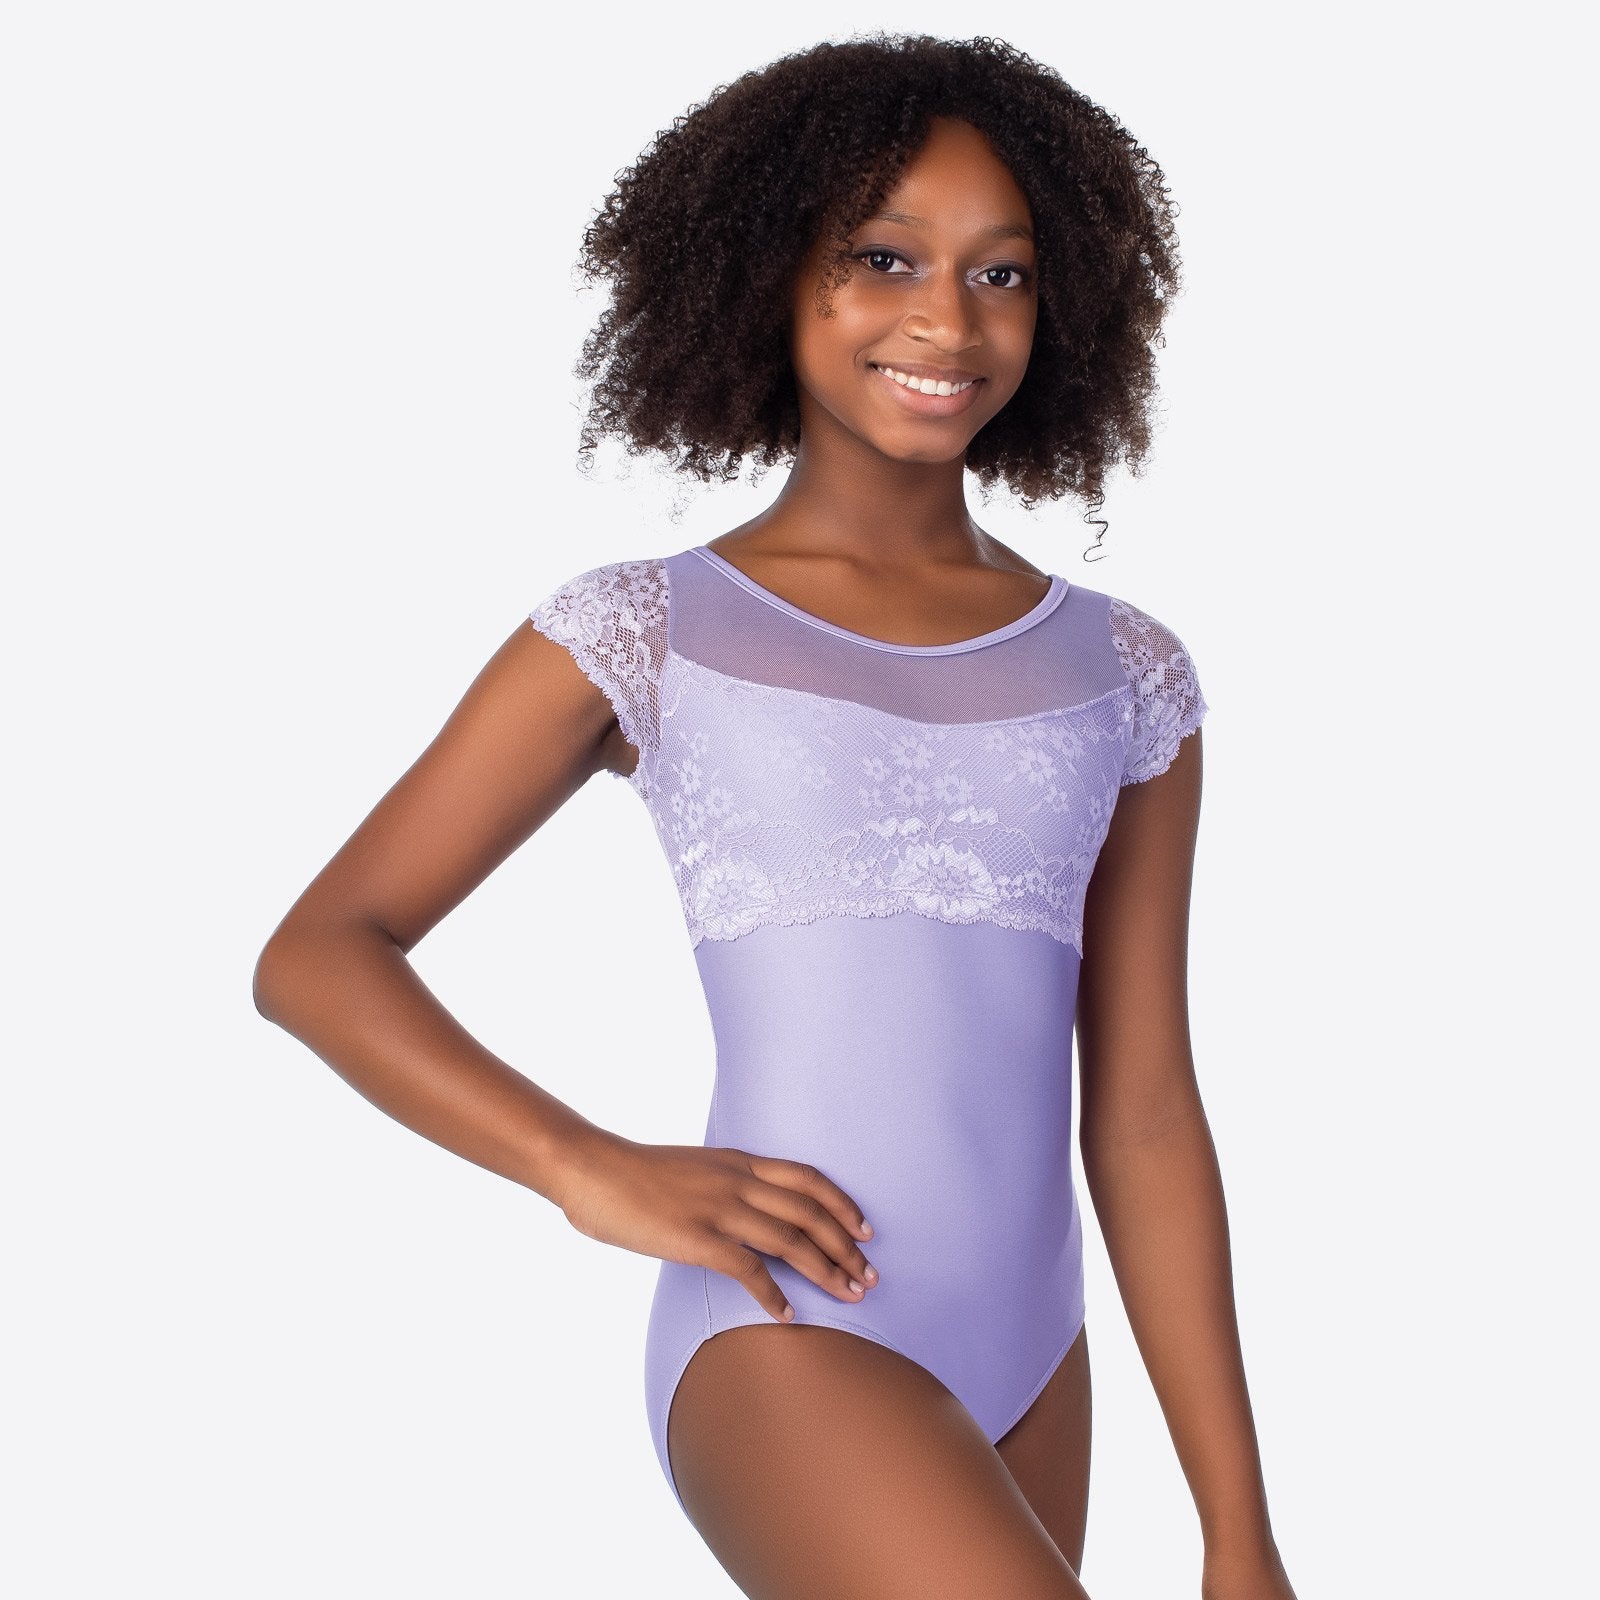 Long Sleeve Leotard with Floral Lace and Mock Neck Design - Fix